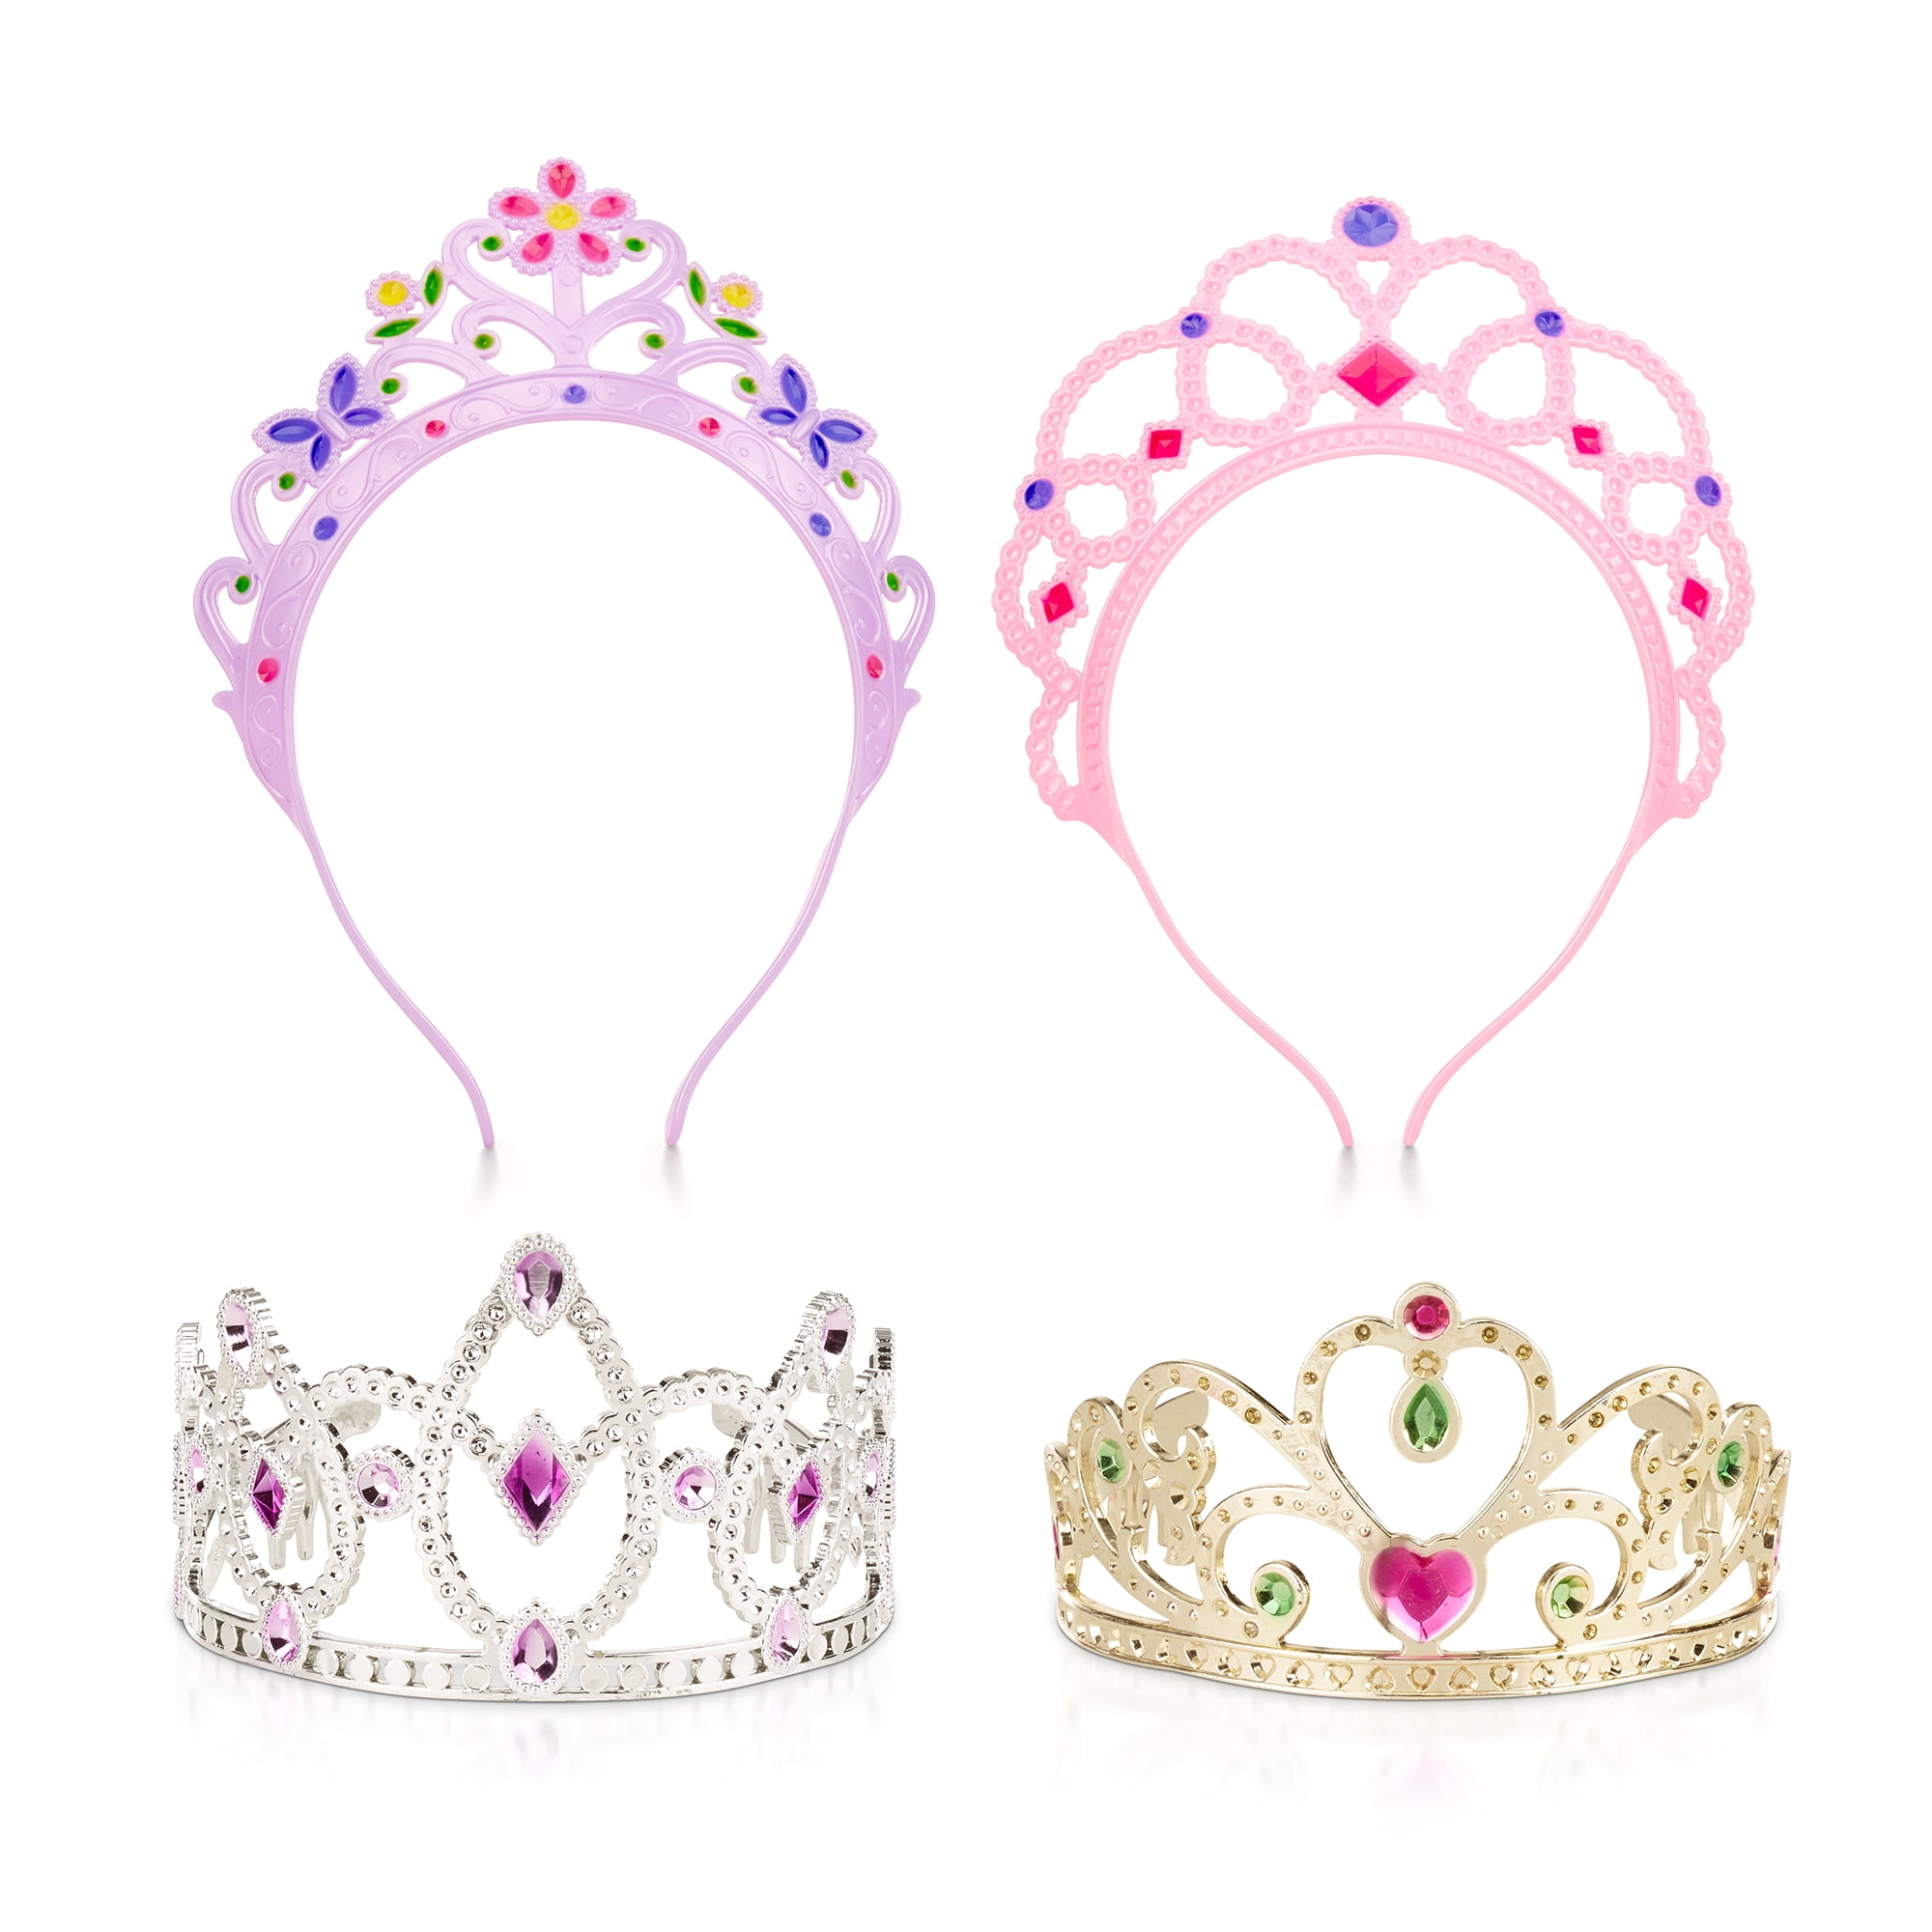 LIGHT UP GIRLS  PRINCESS HEART FEATHER TIARA CROWN  dressup costume new hat NEW 